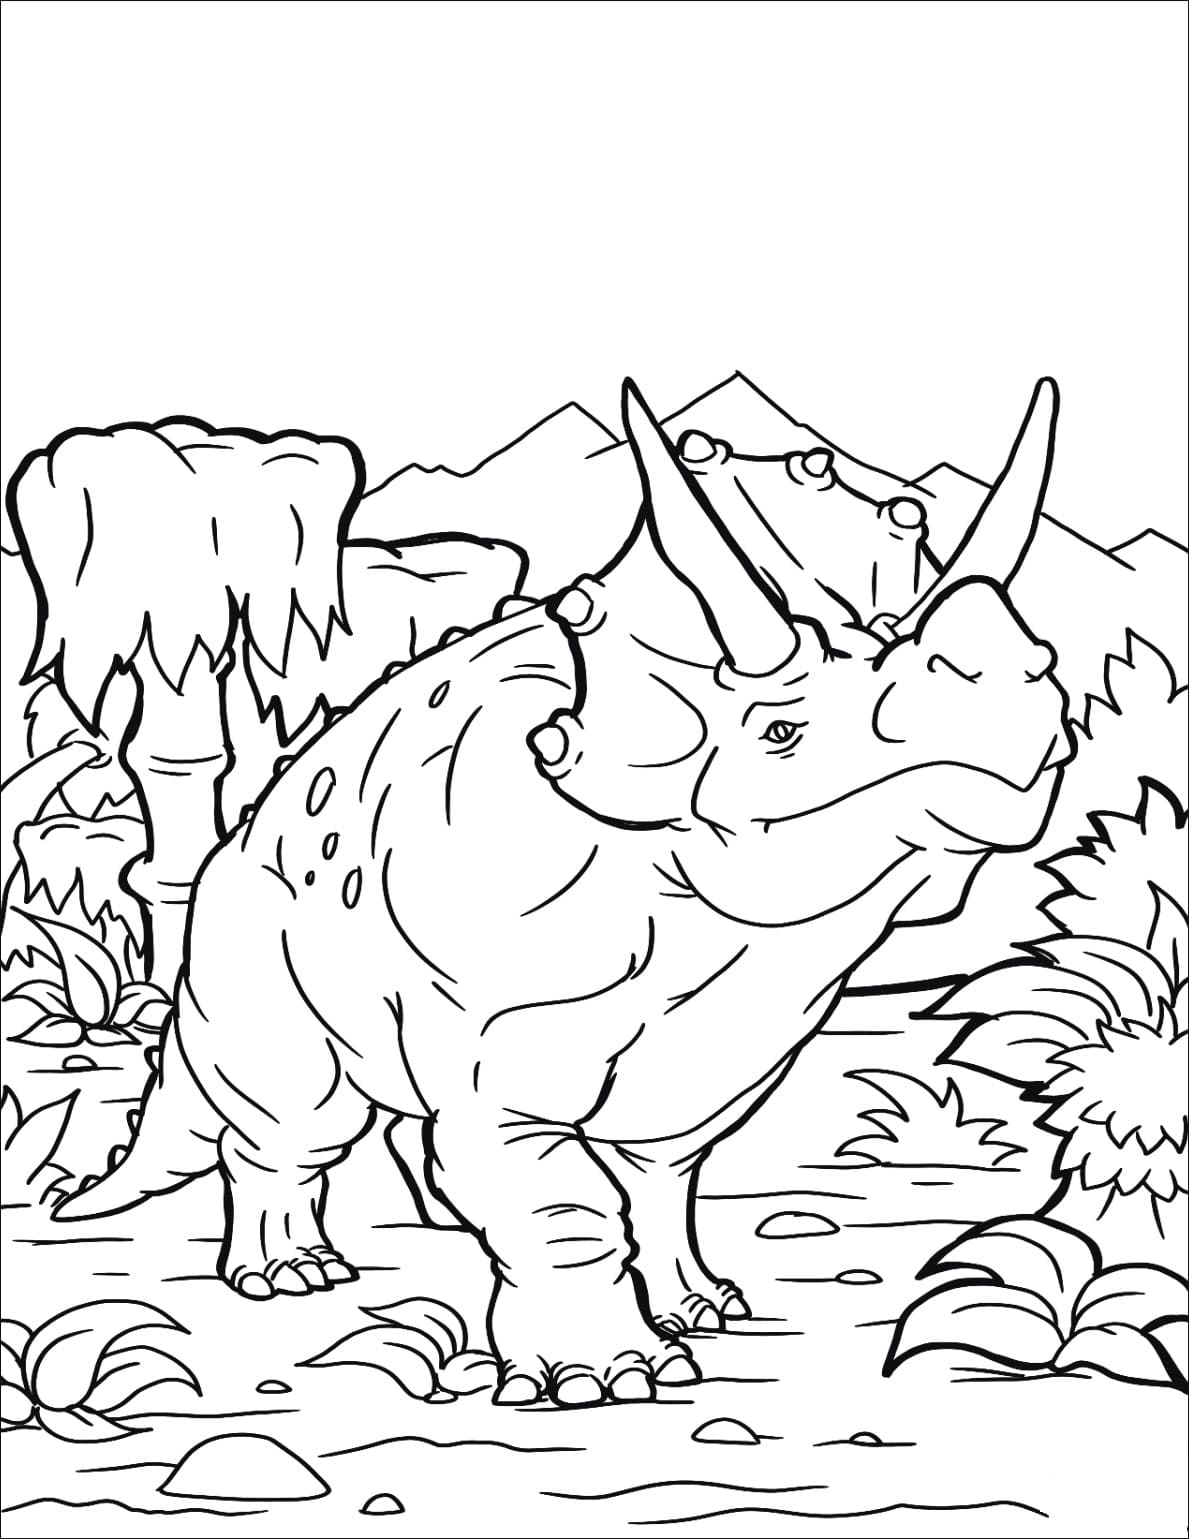 Coloring pages Triceratops. Download or print for free